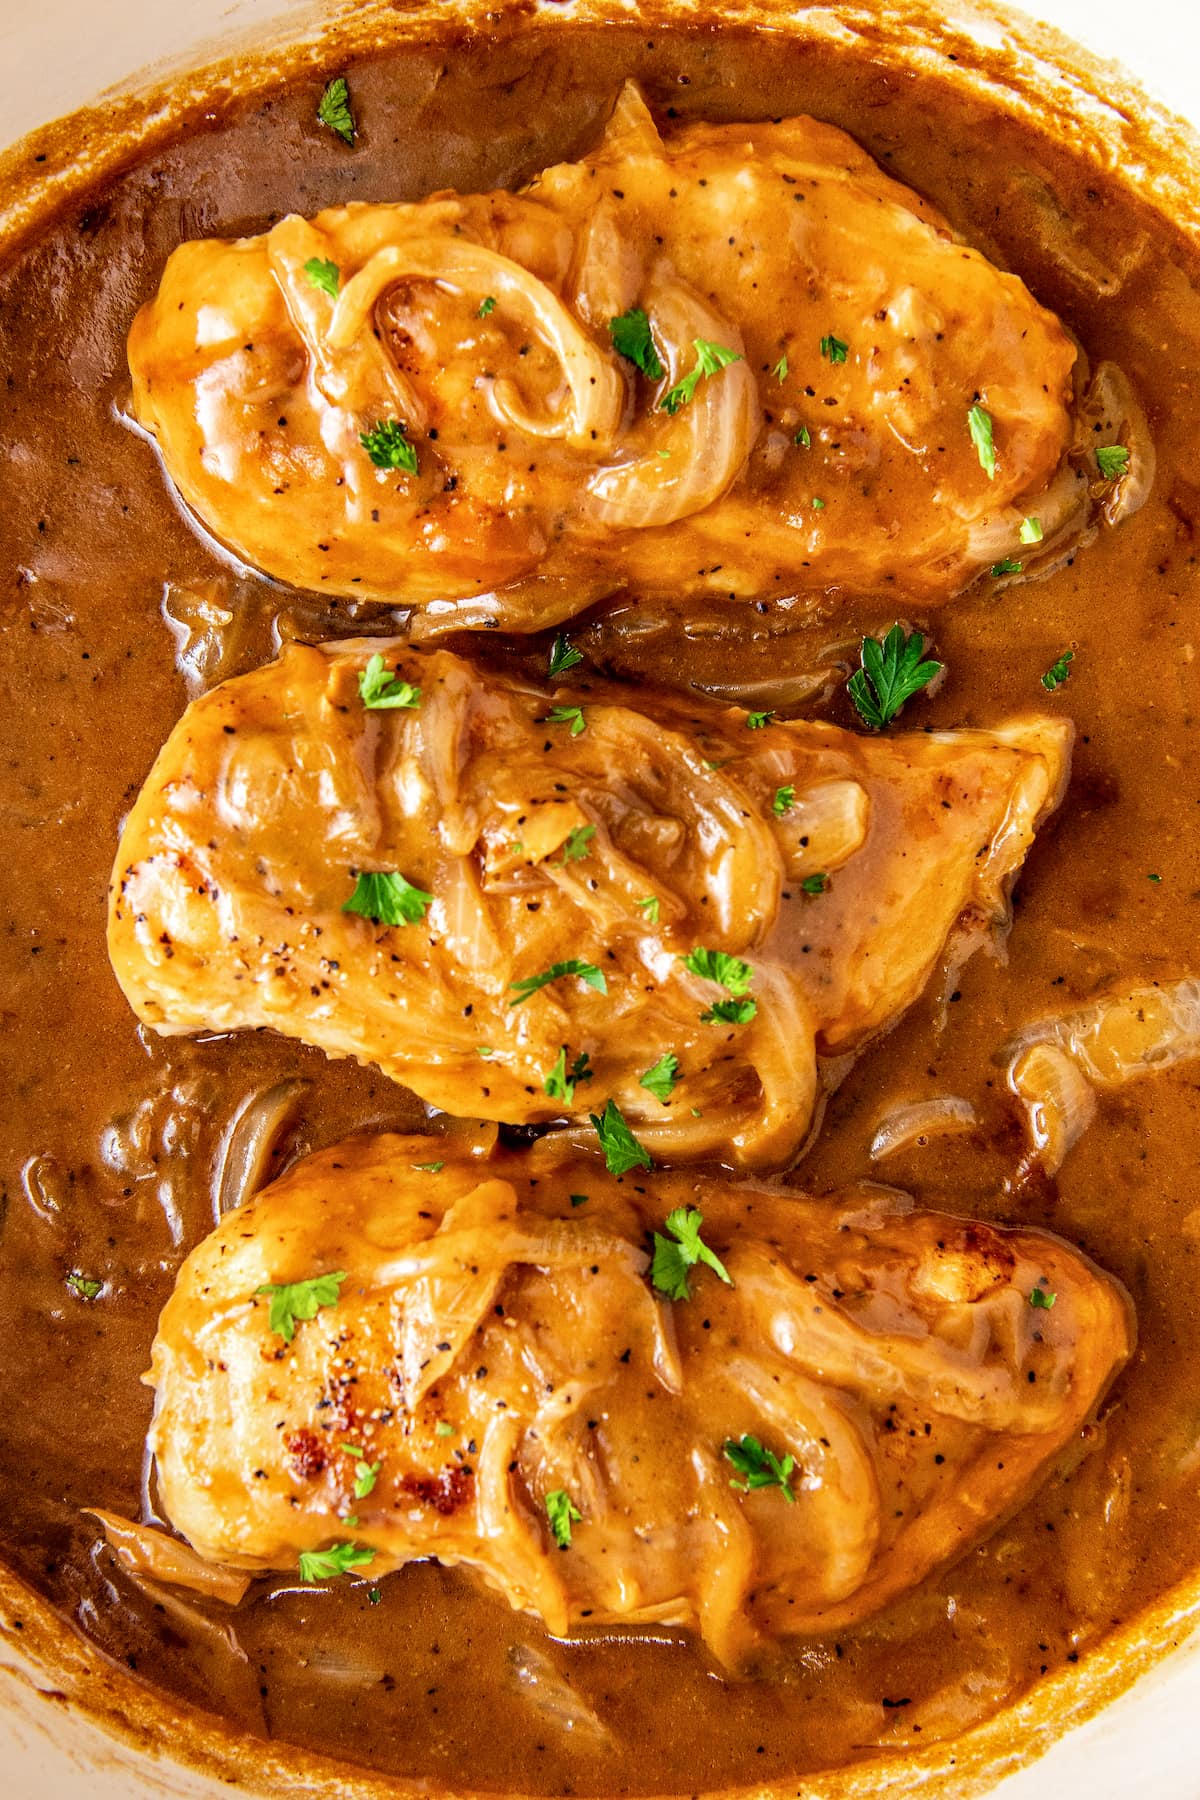 Three tender, smothered chicken breast in a rich and savory brown onion gravy.